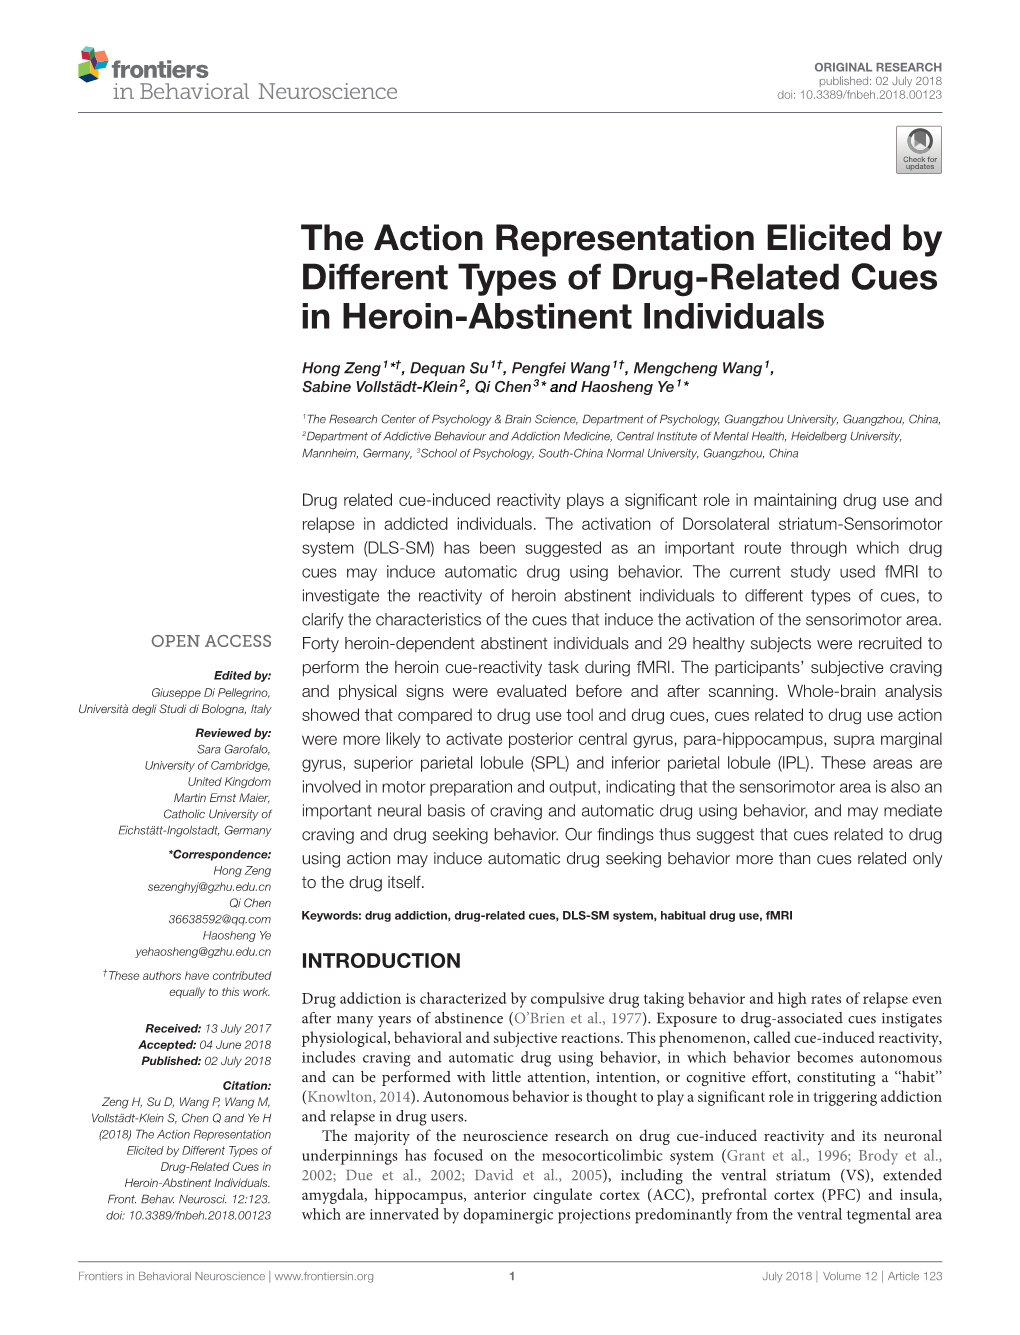 The Action Representation Elicited by Different Types of Drug-Related Cues in Heroin-Abstinent Individuals